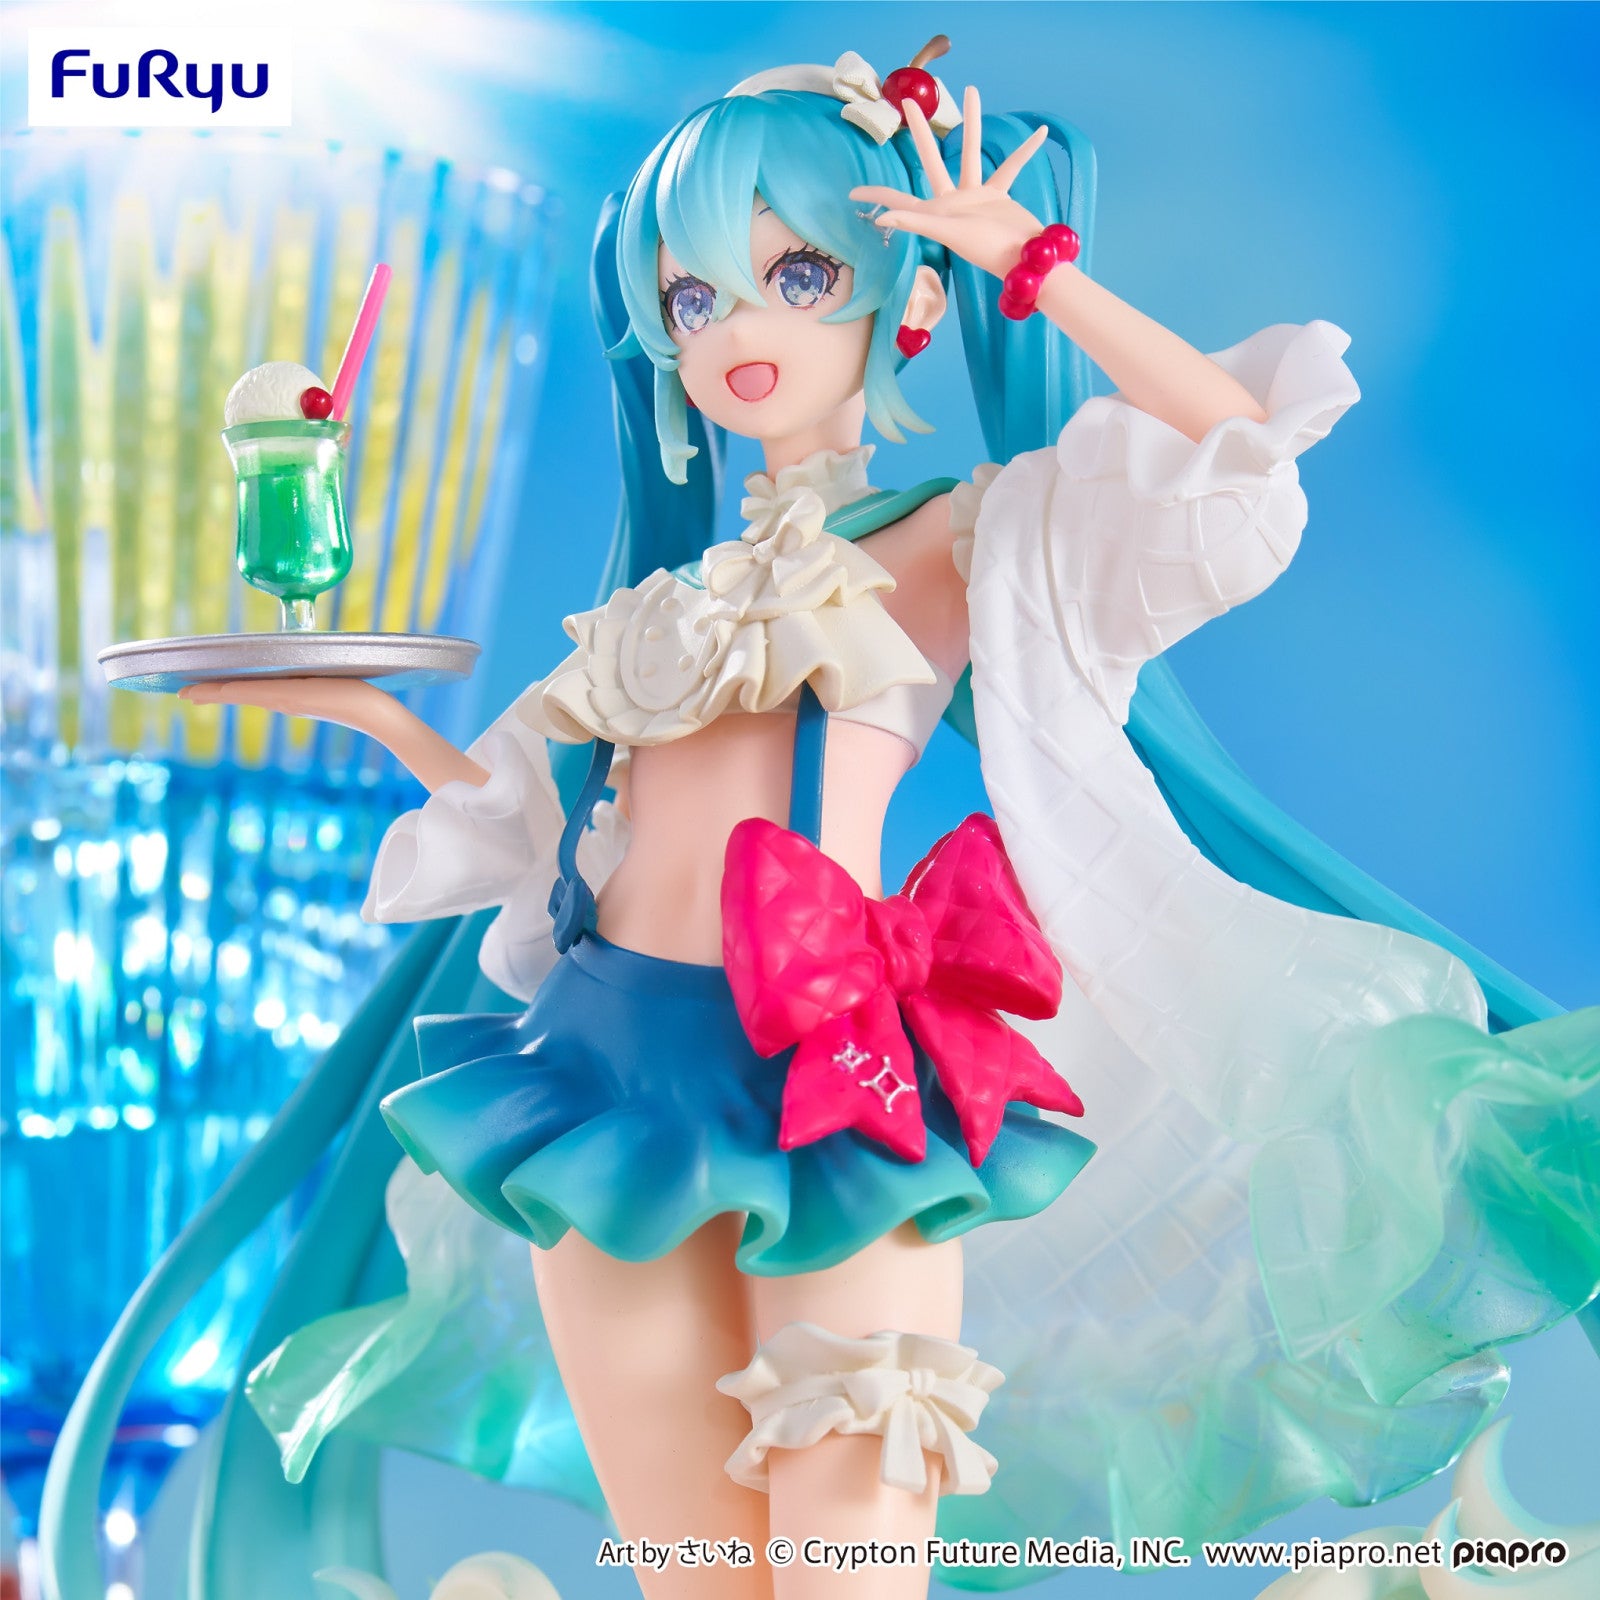 Vocaloid Characters: EXCEED CREATIVE FIGURE - Hatsune Miku SWEET SWEETS SERIES Melon Soda Float